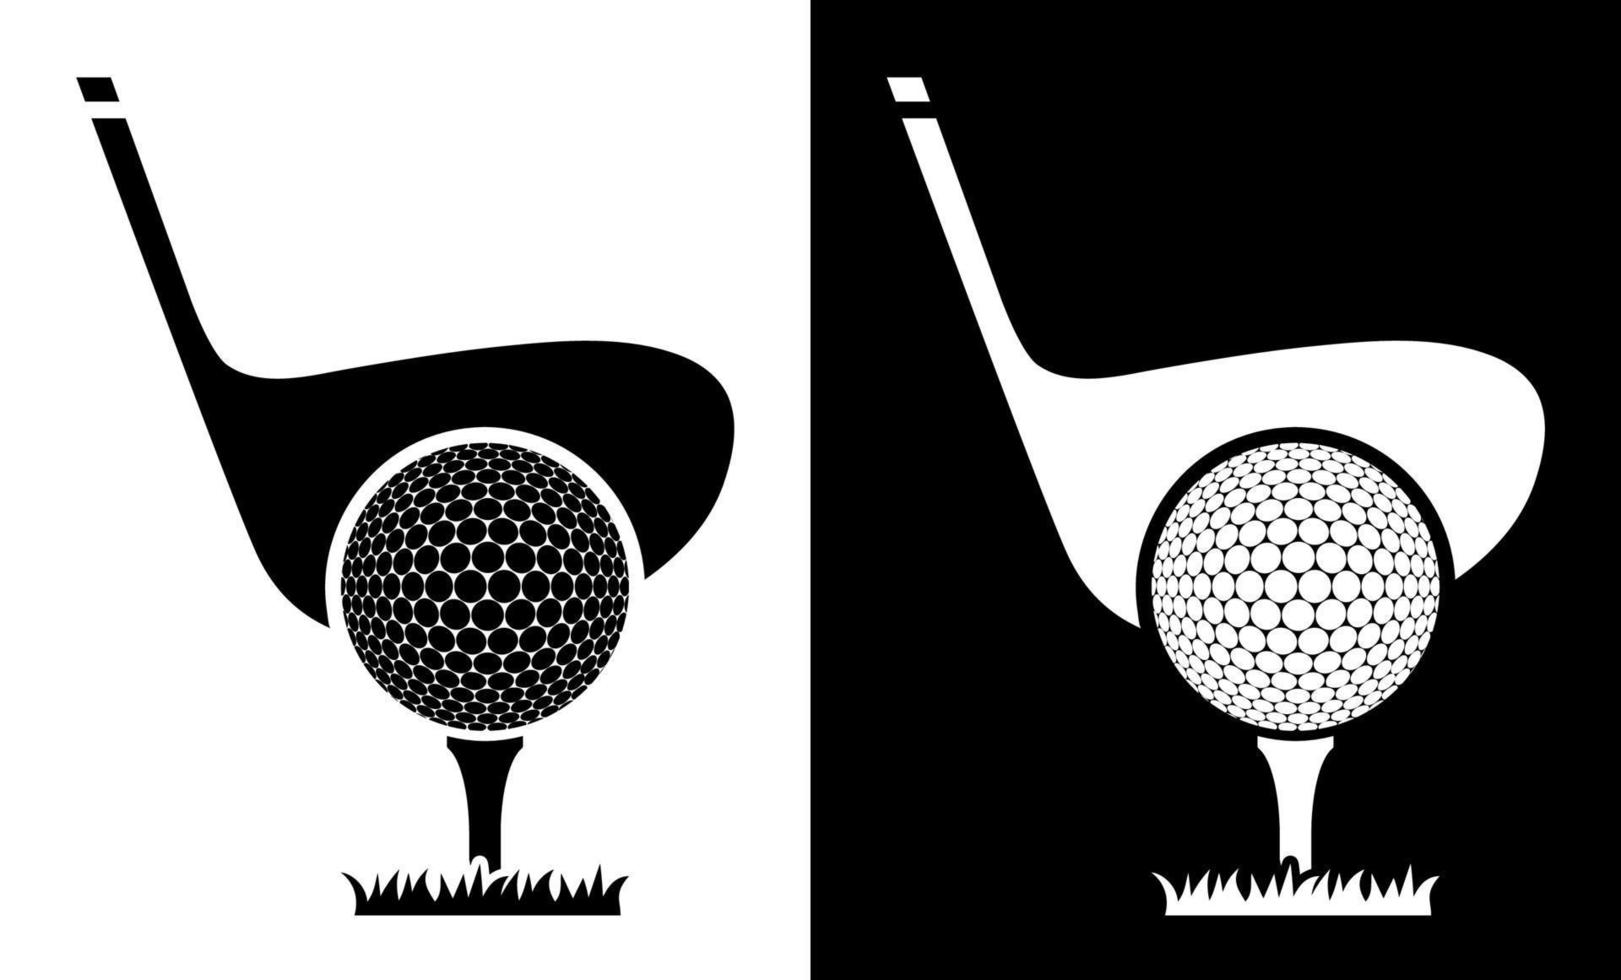 golf club icon with ball on tee. Golfer takes aim for precise and powerful shot. Sport competition. Vector